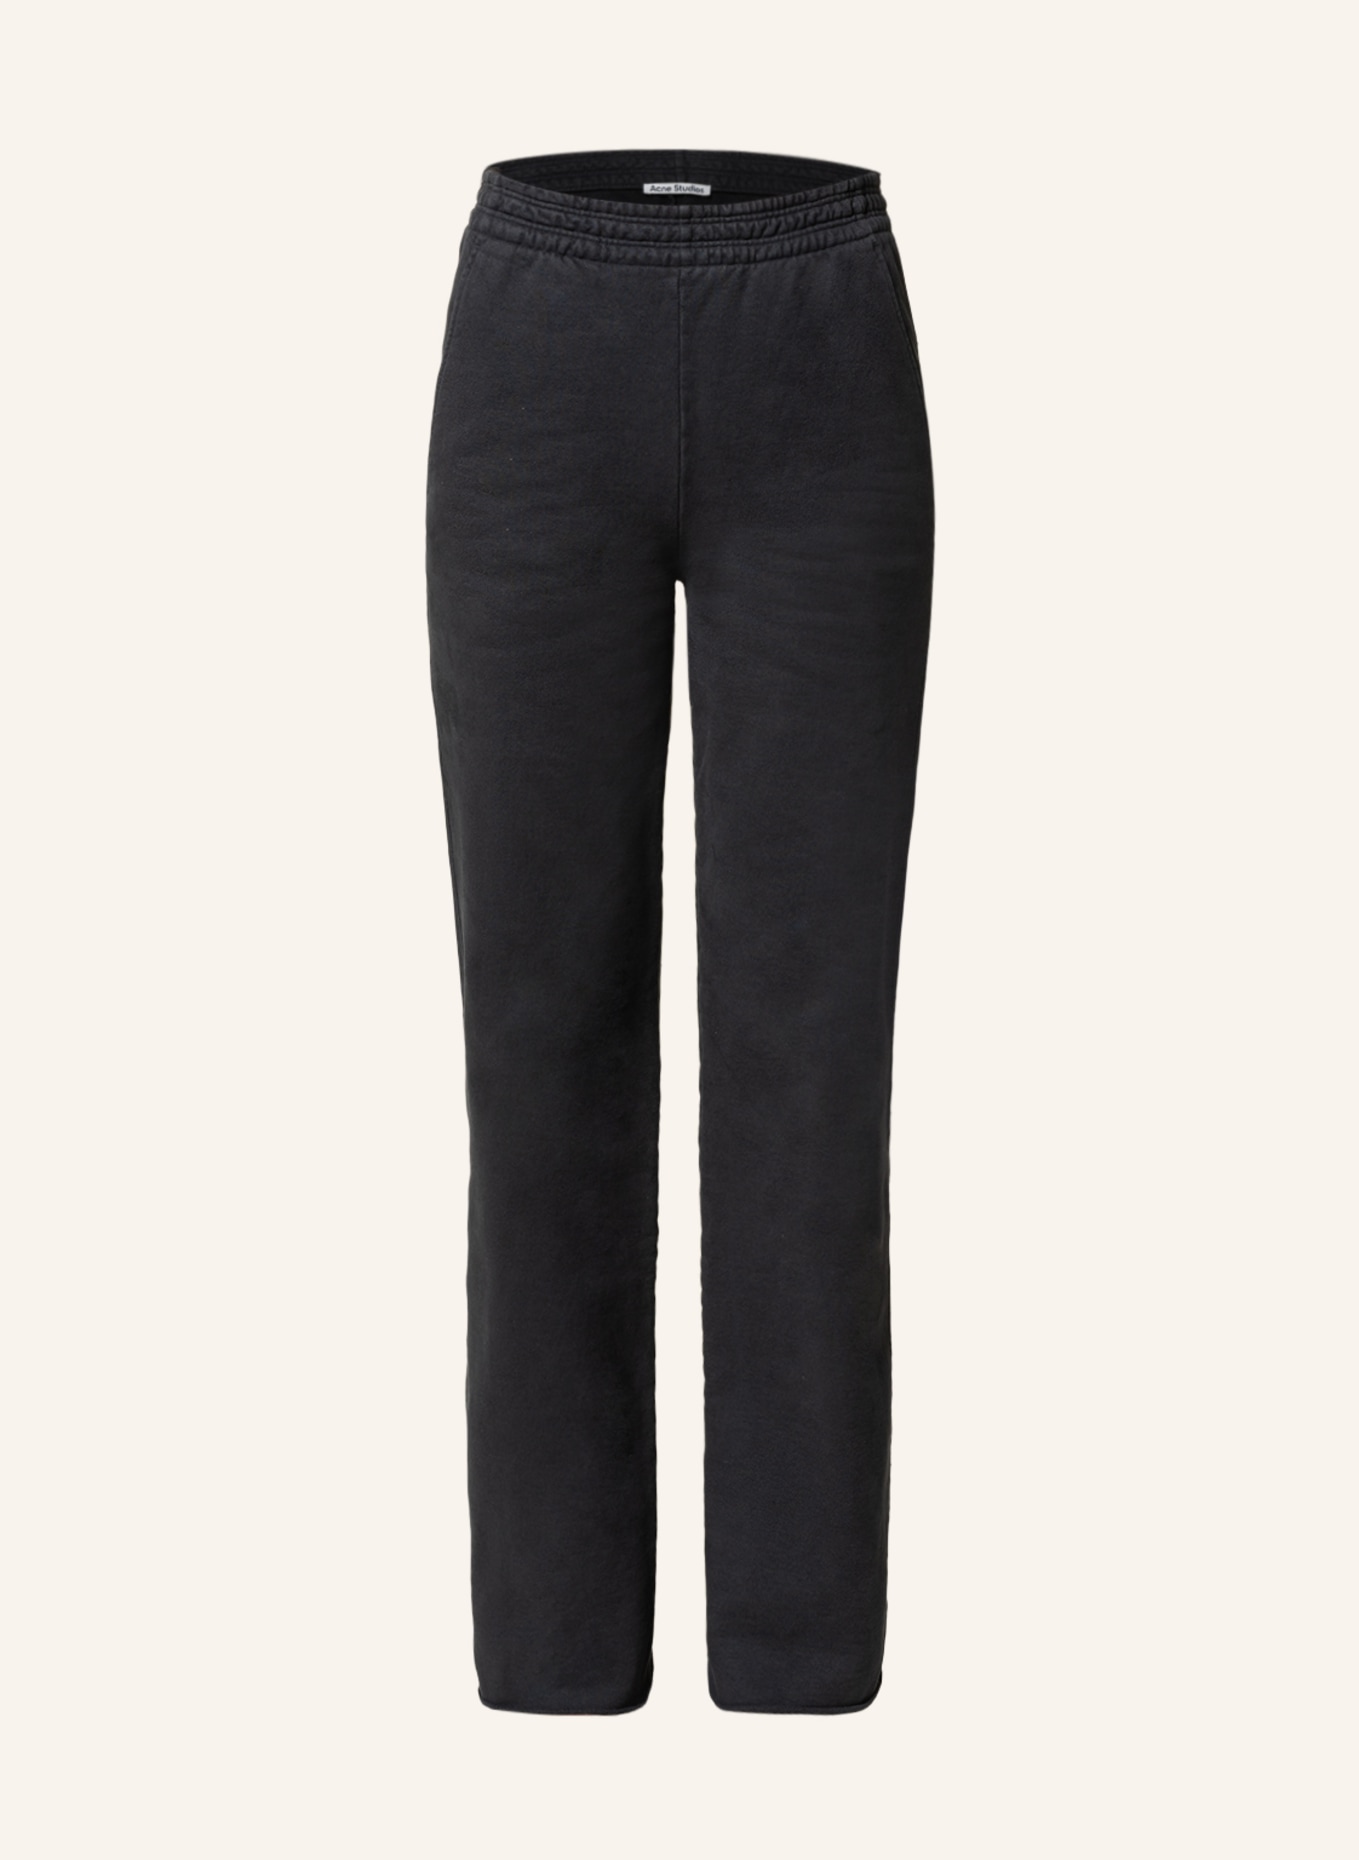 Acne Studios Pants in jogger style, Color: BLACK (Image 1)